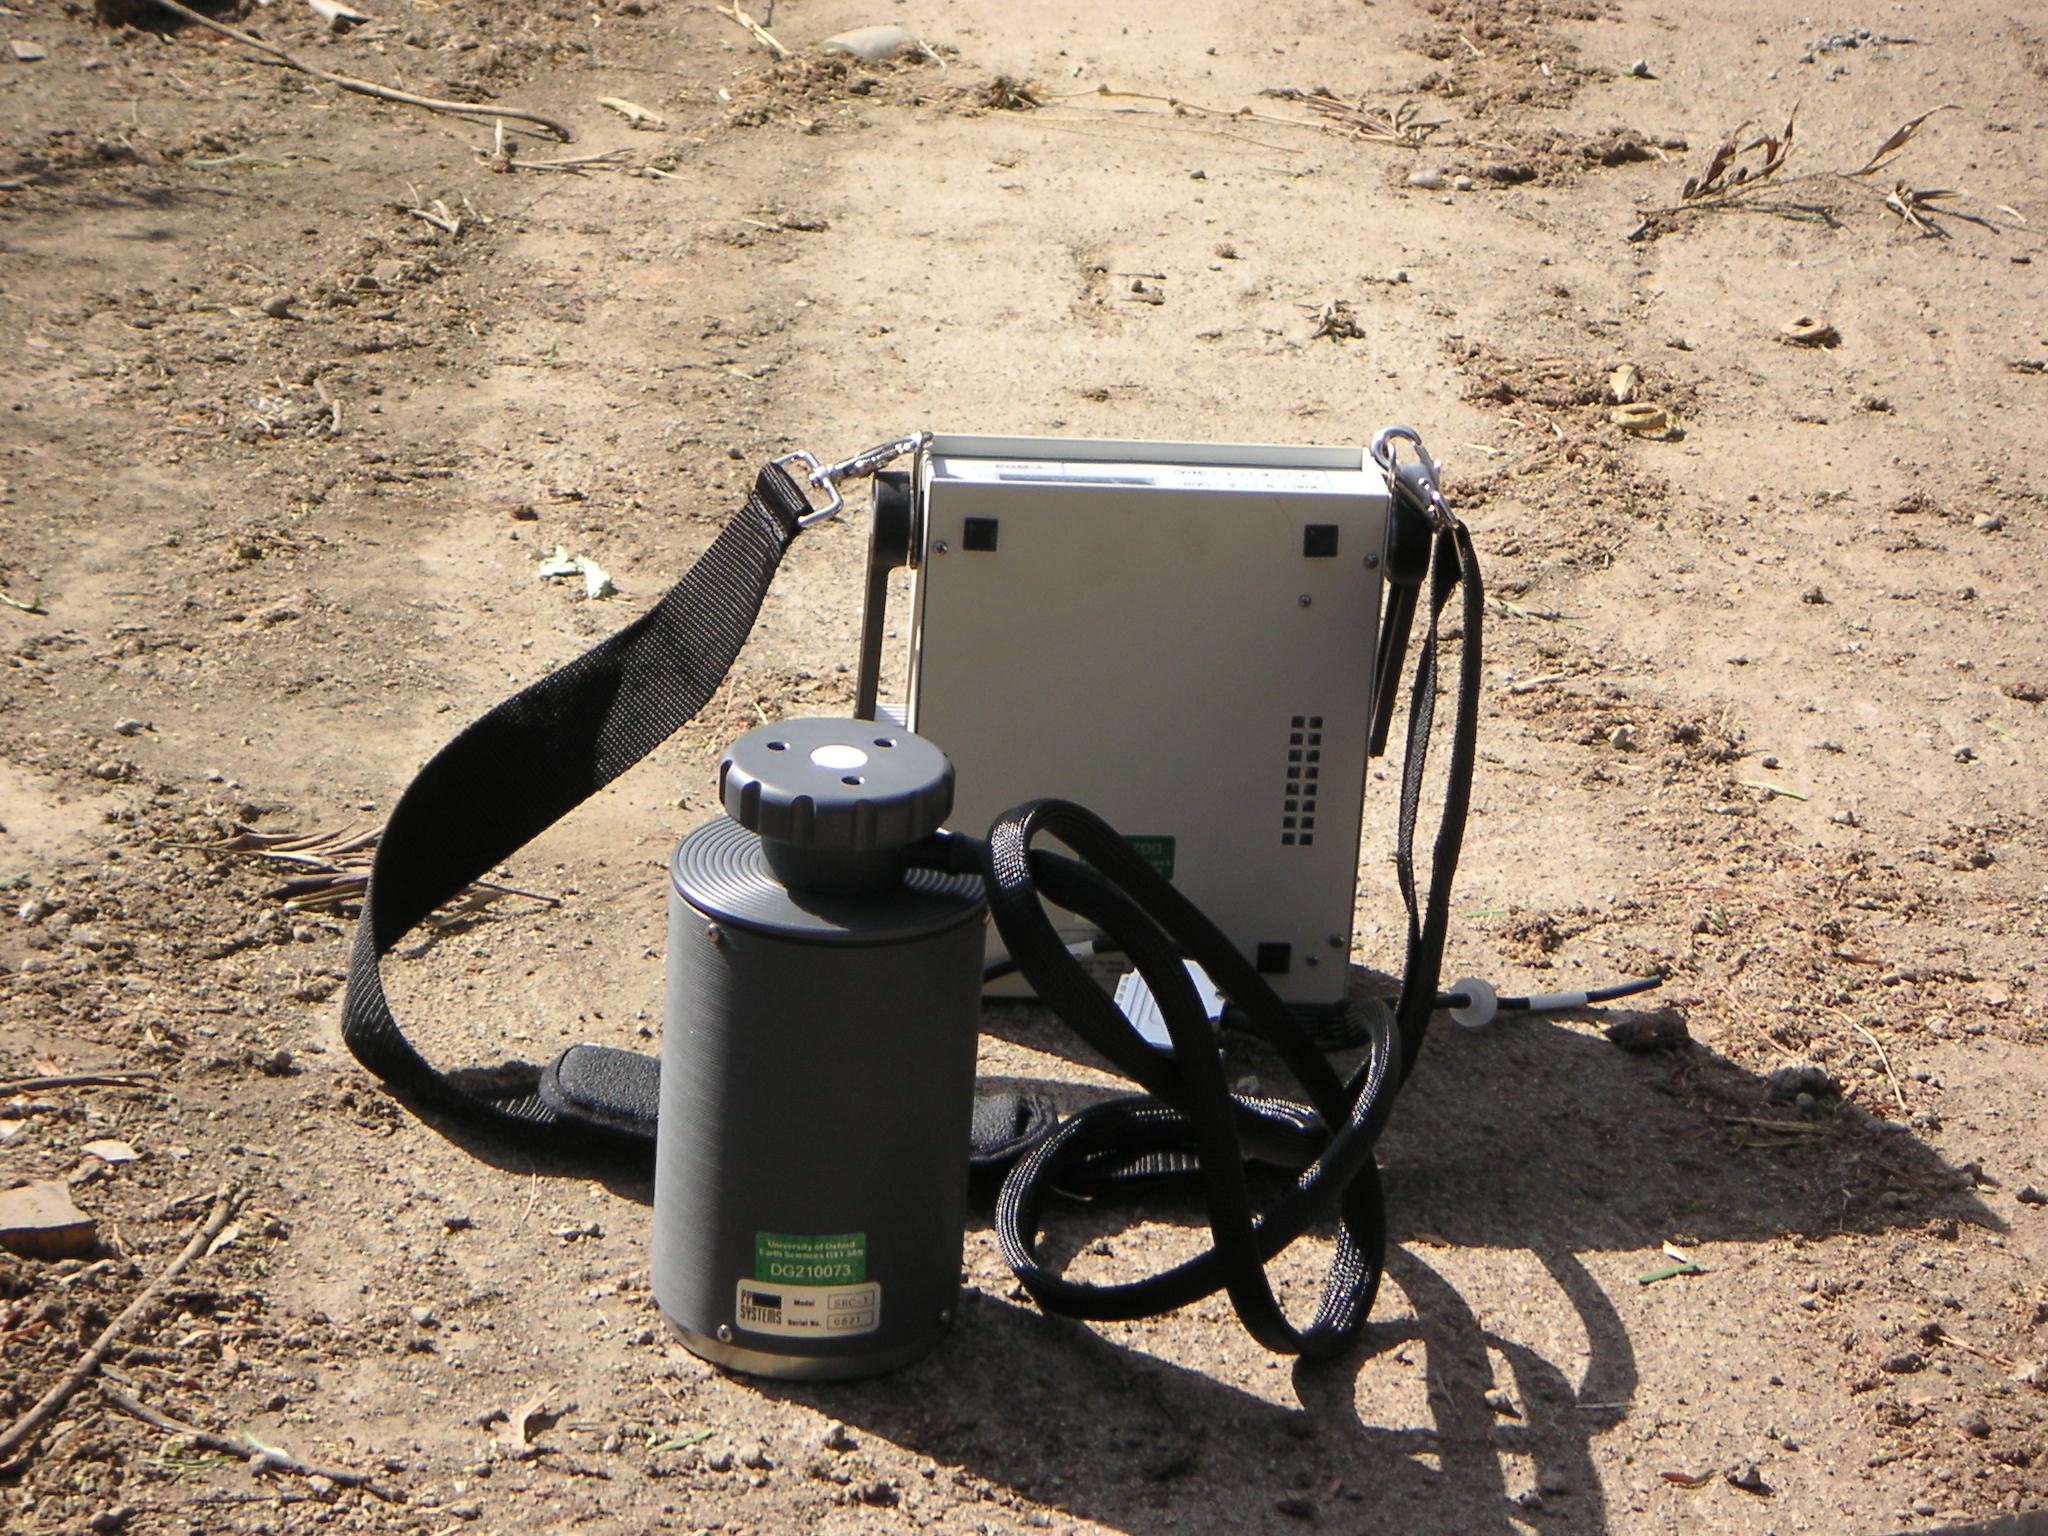 Soil gas measurement using an accumulation chamber, with a PP systems chamber and portable gas analyser.